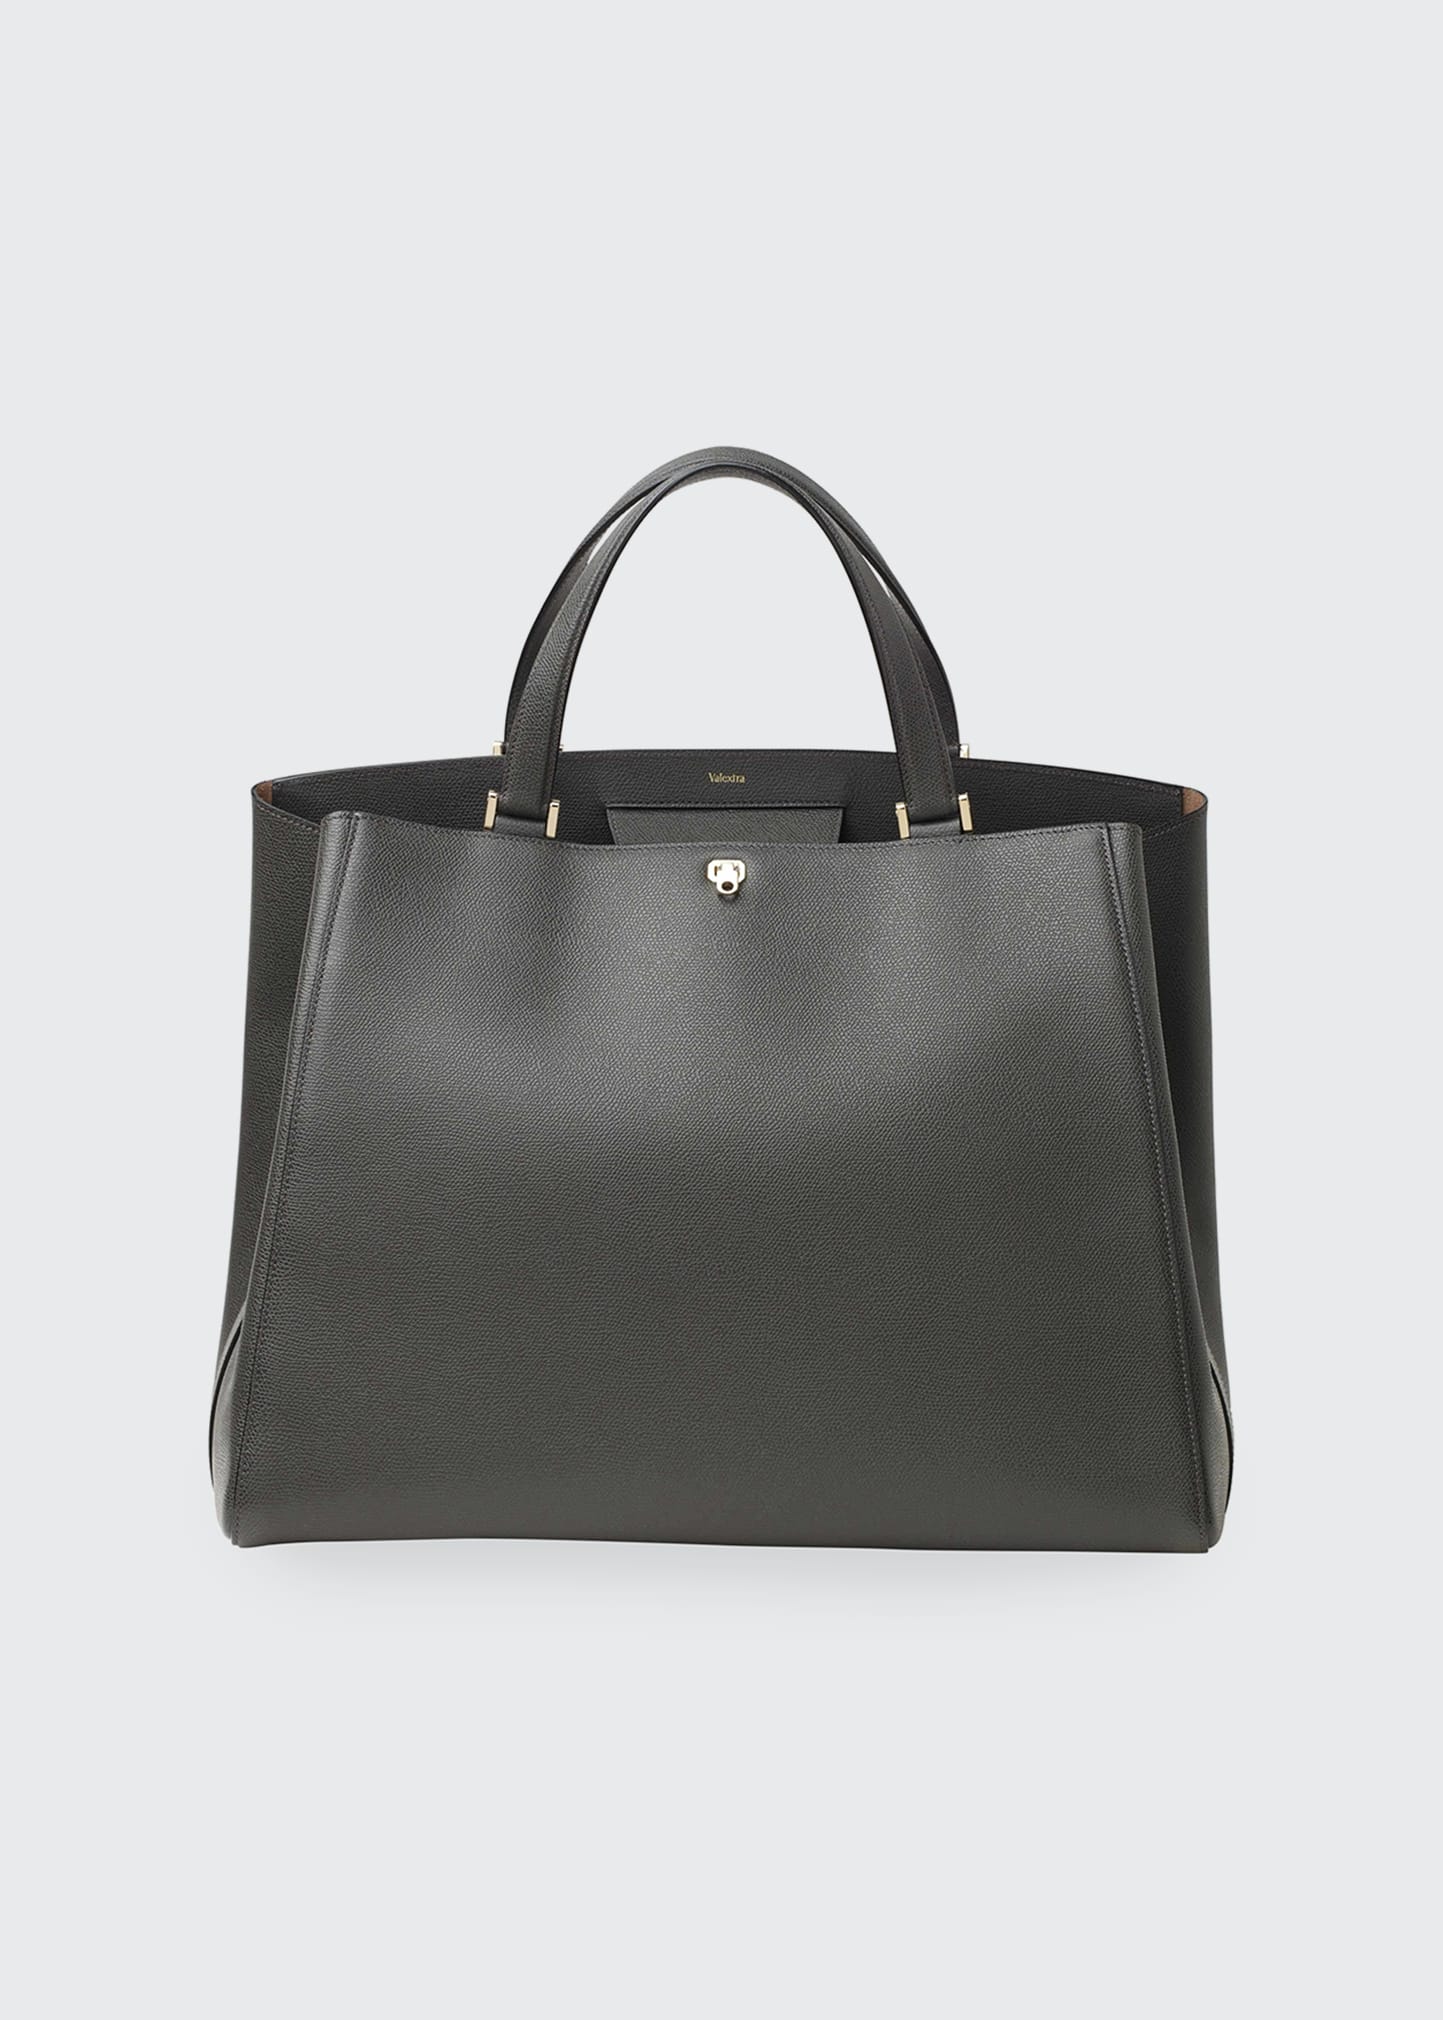 Valextra Brera Large Leather Top-handle Tote Bag In Gf Fumo